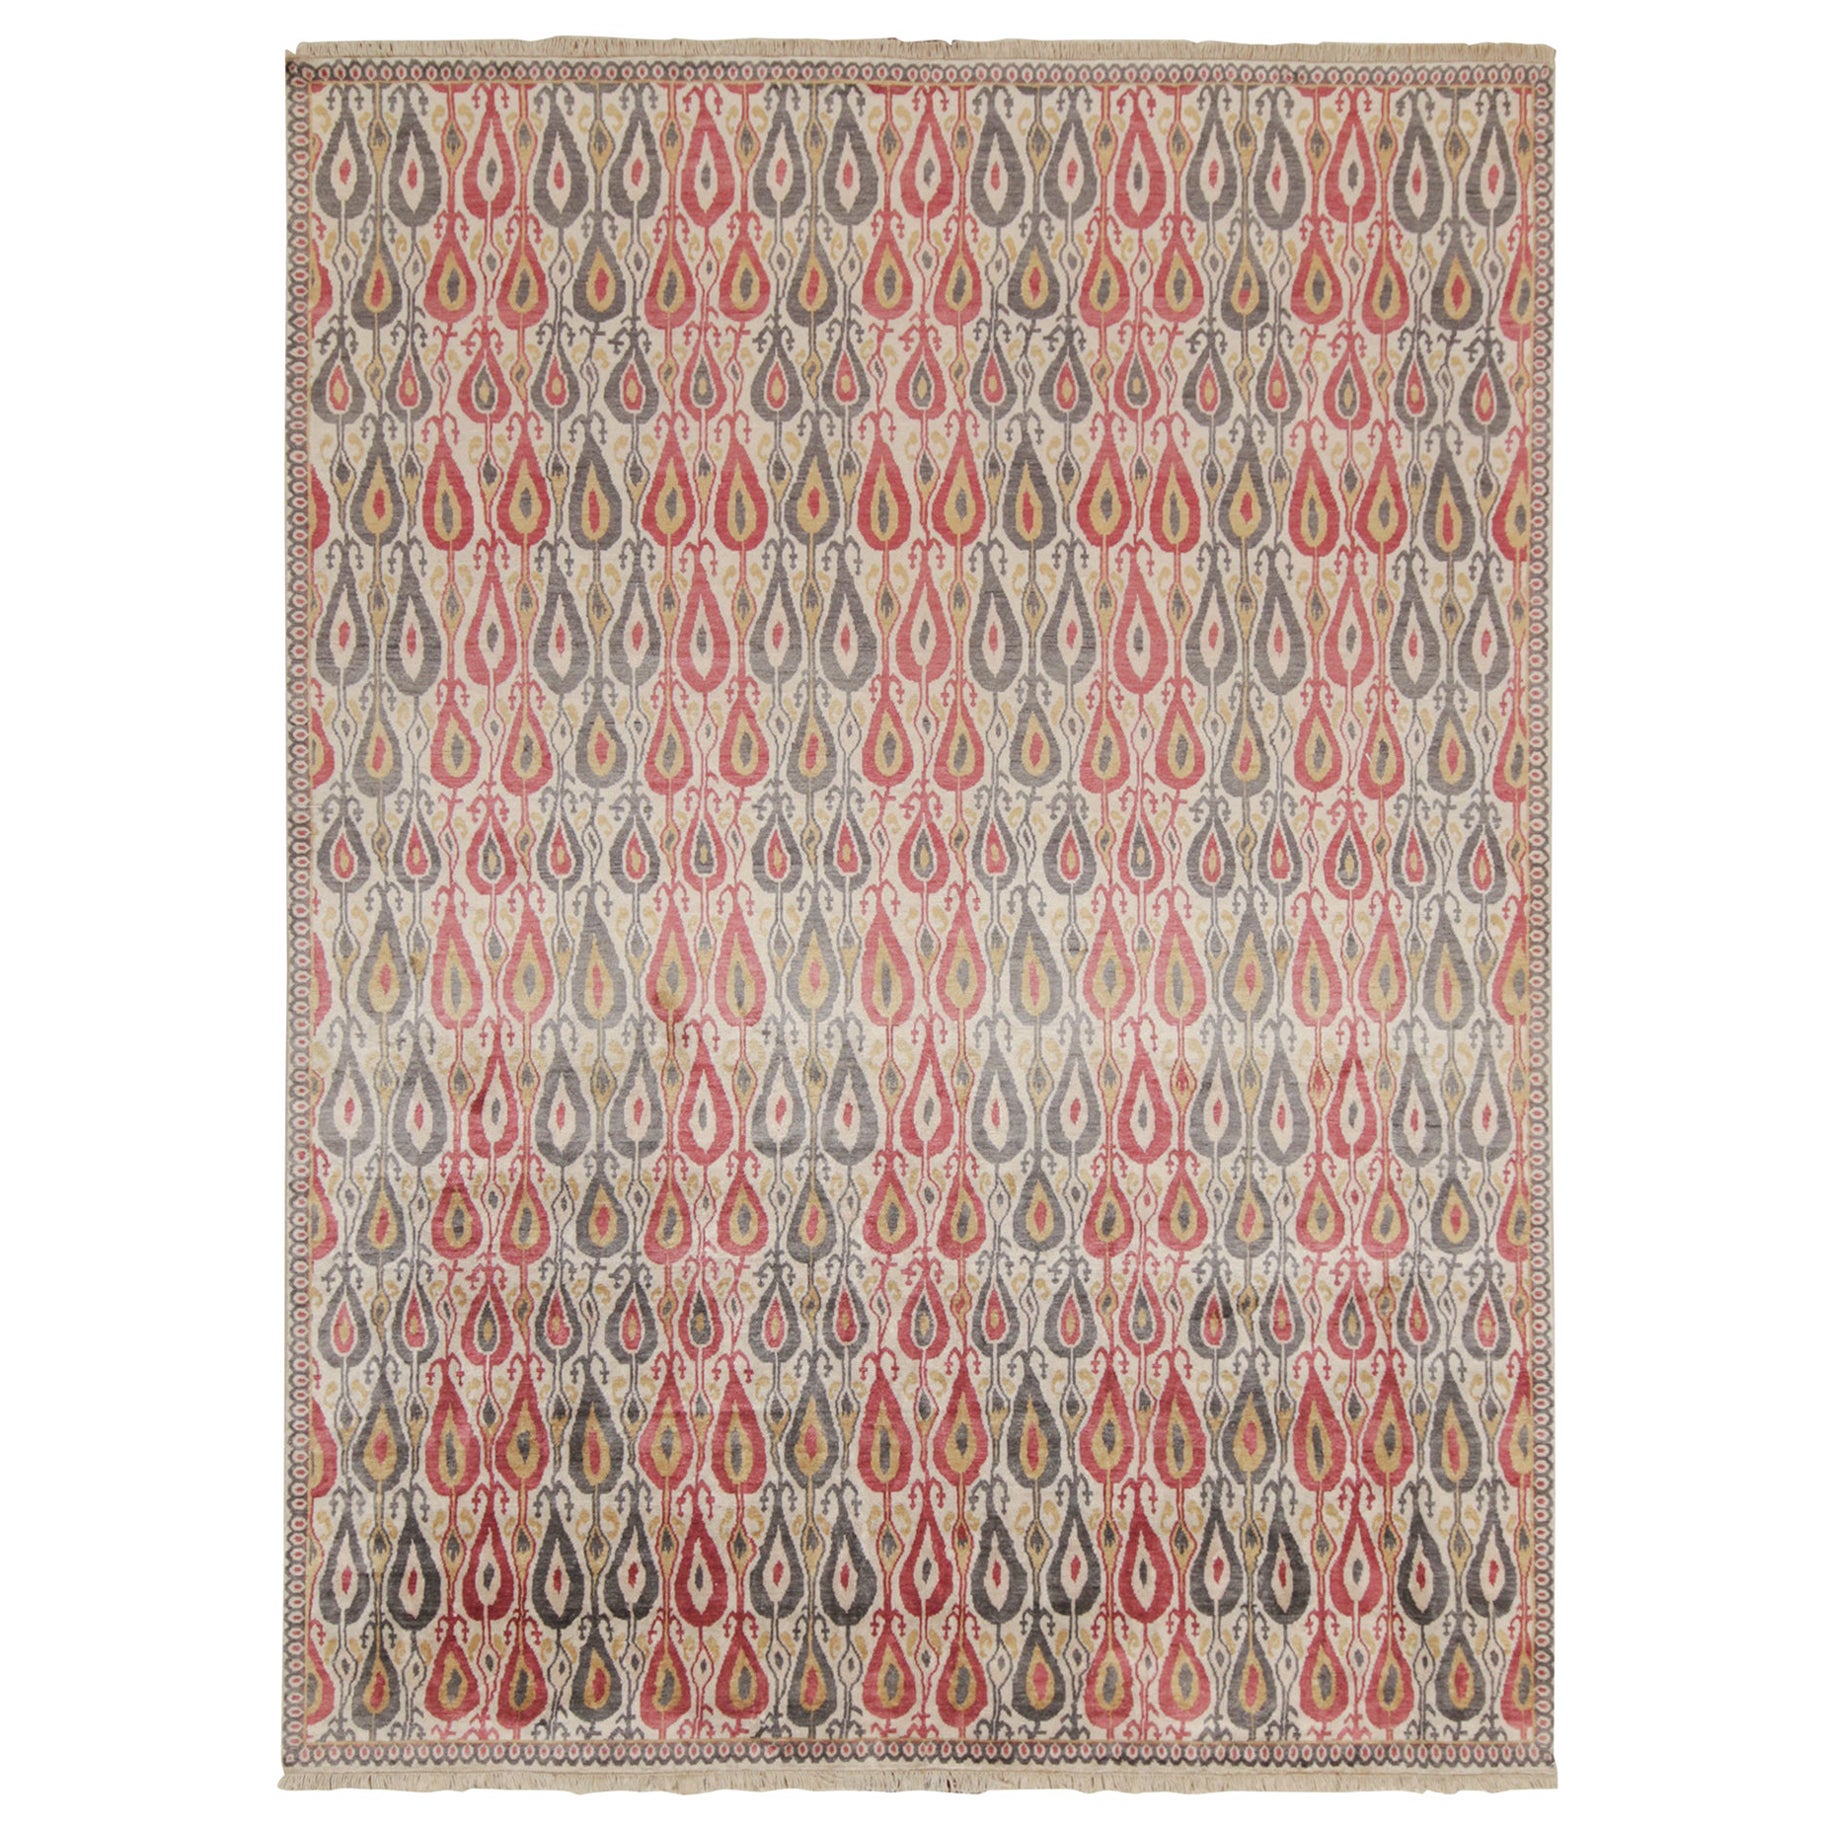 Rug & Kilim’s Classic Ikats Style Rug with Red, Gray and Gold Patterns For Sale